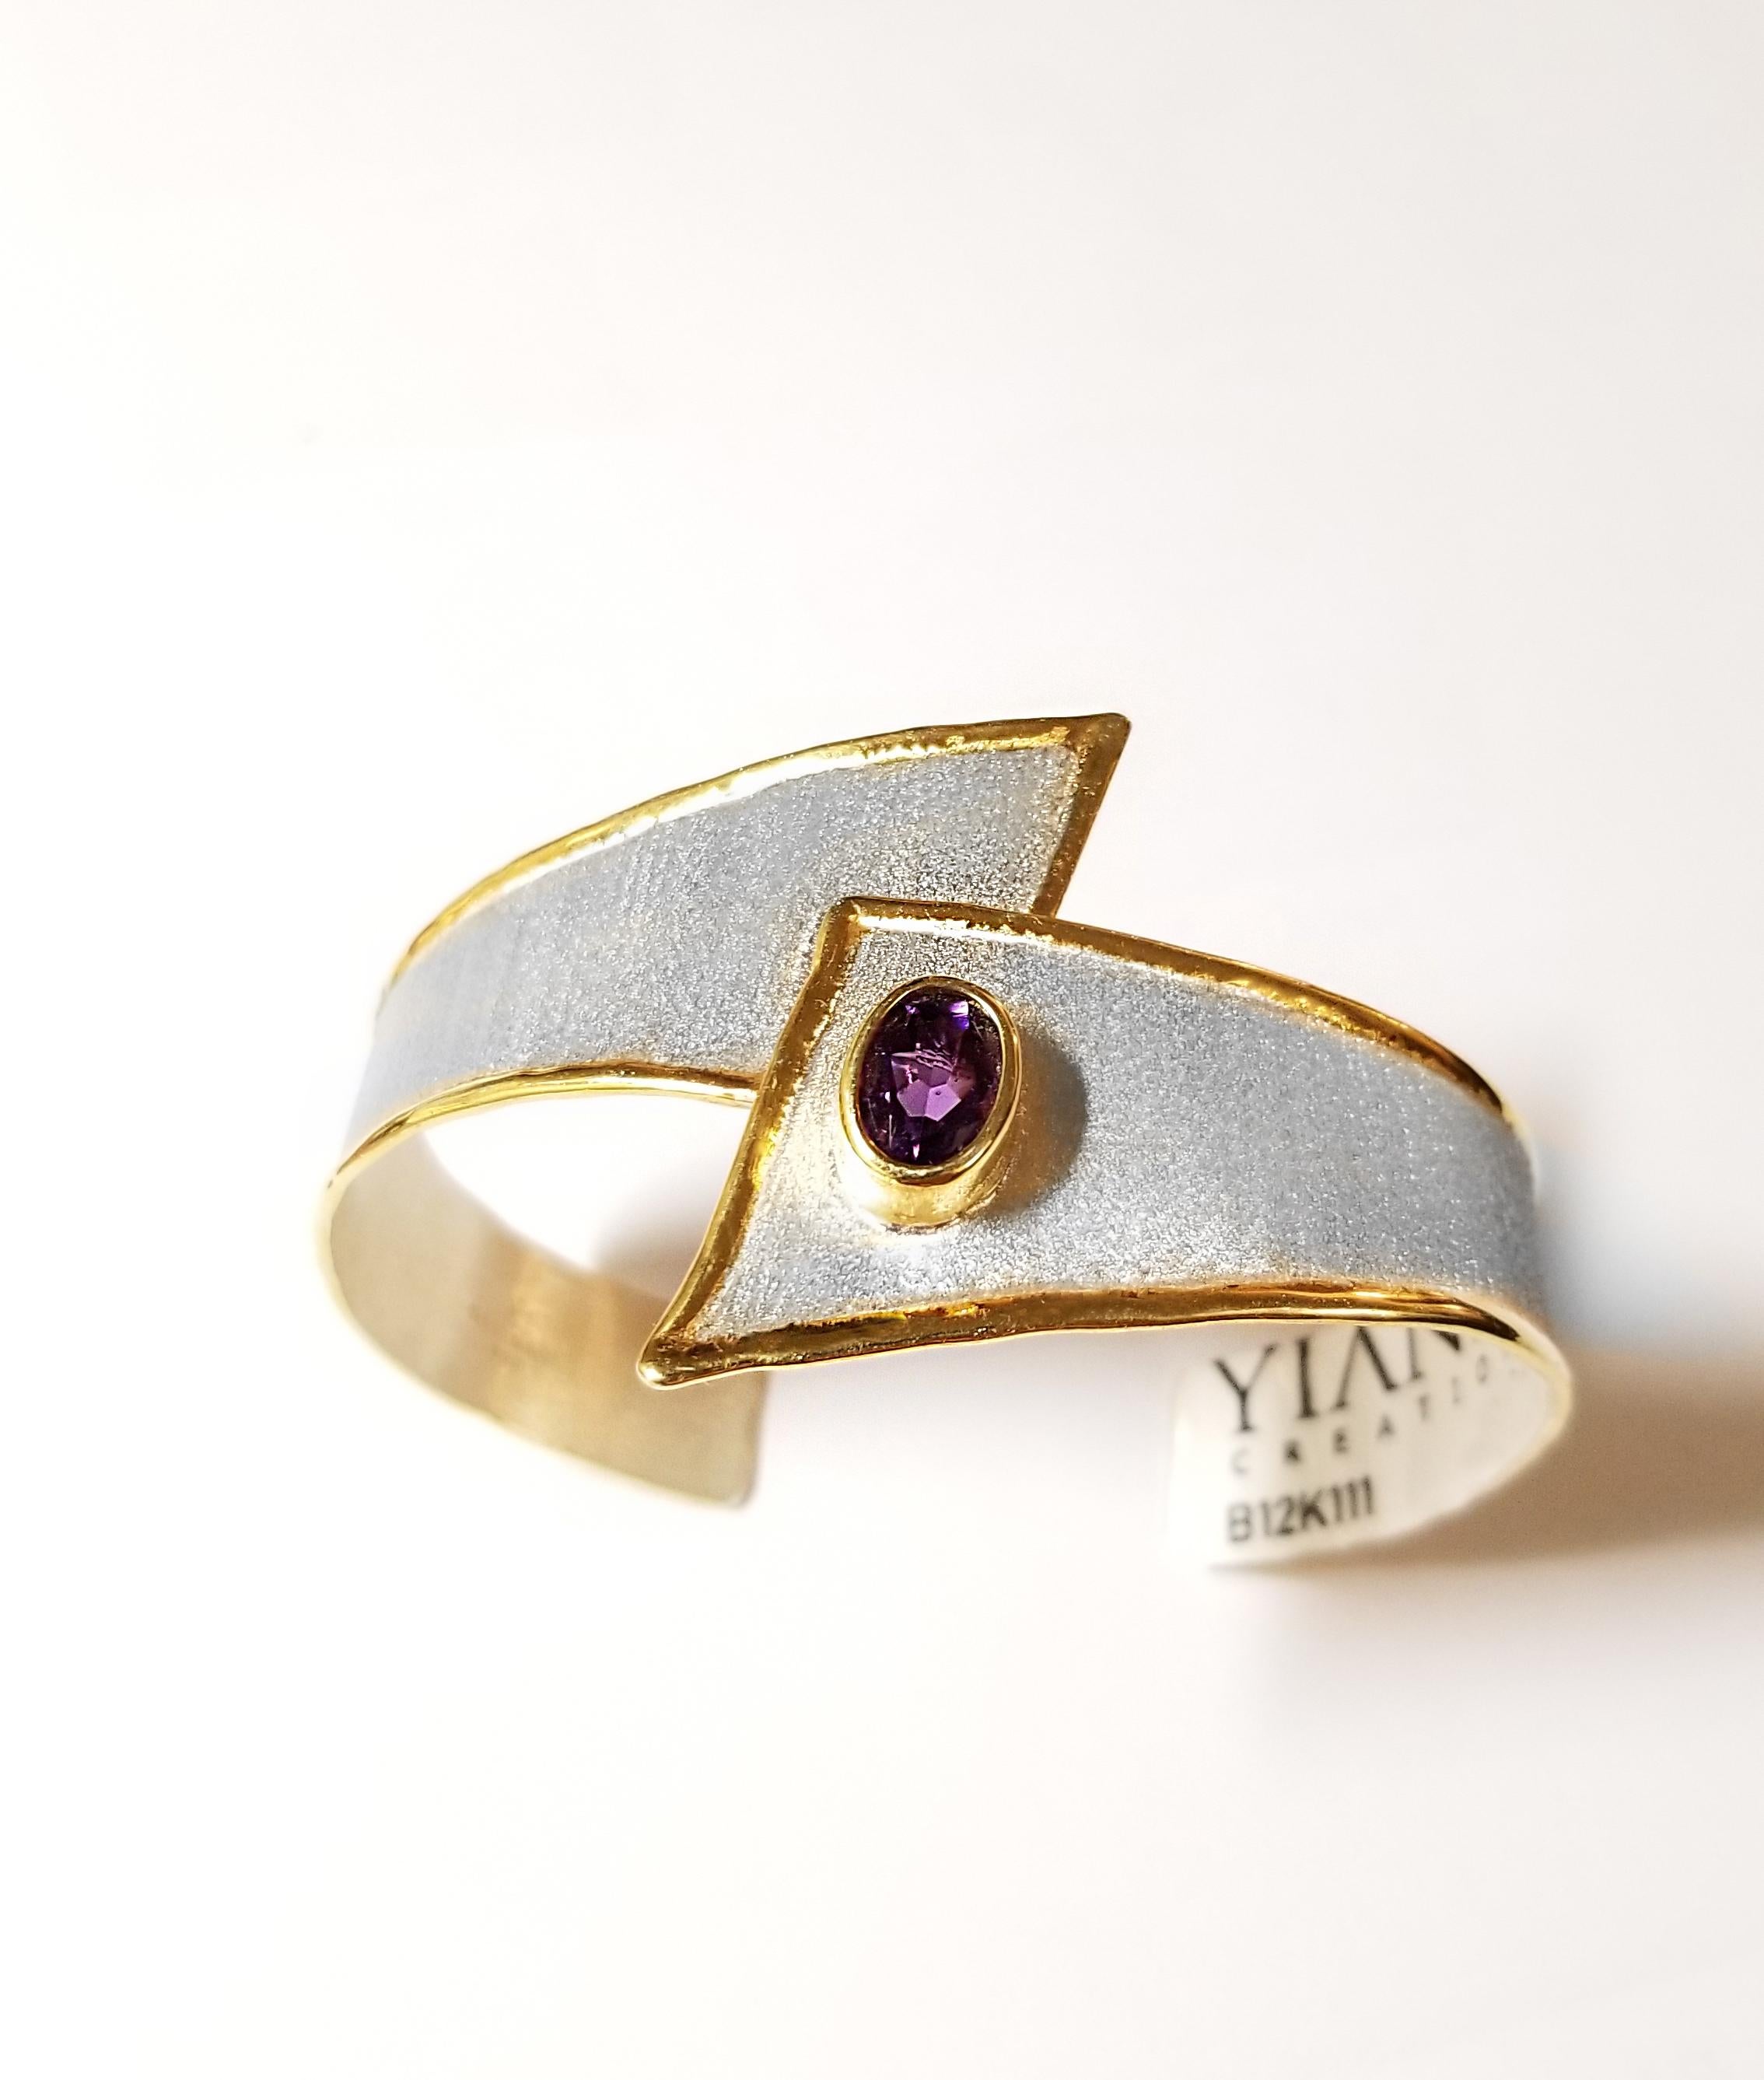 Yianni Creations Fine Silver and Gold 24 Karat Edges Two-Tone with Amethyst In New Condition For Sale In Astoria, NY